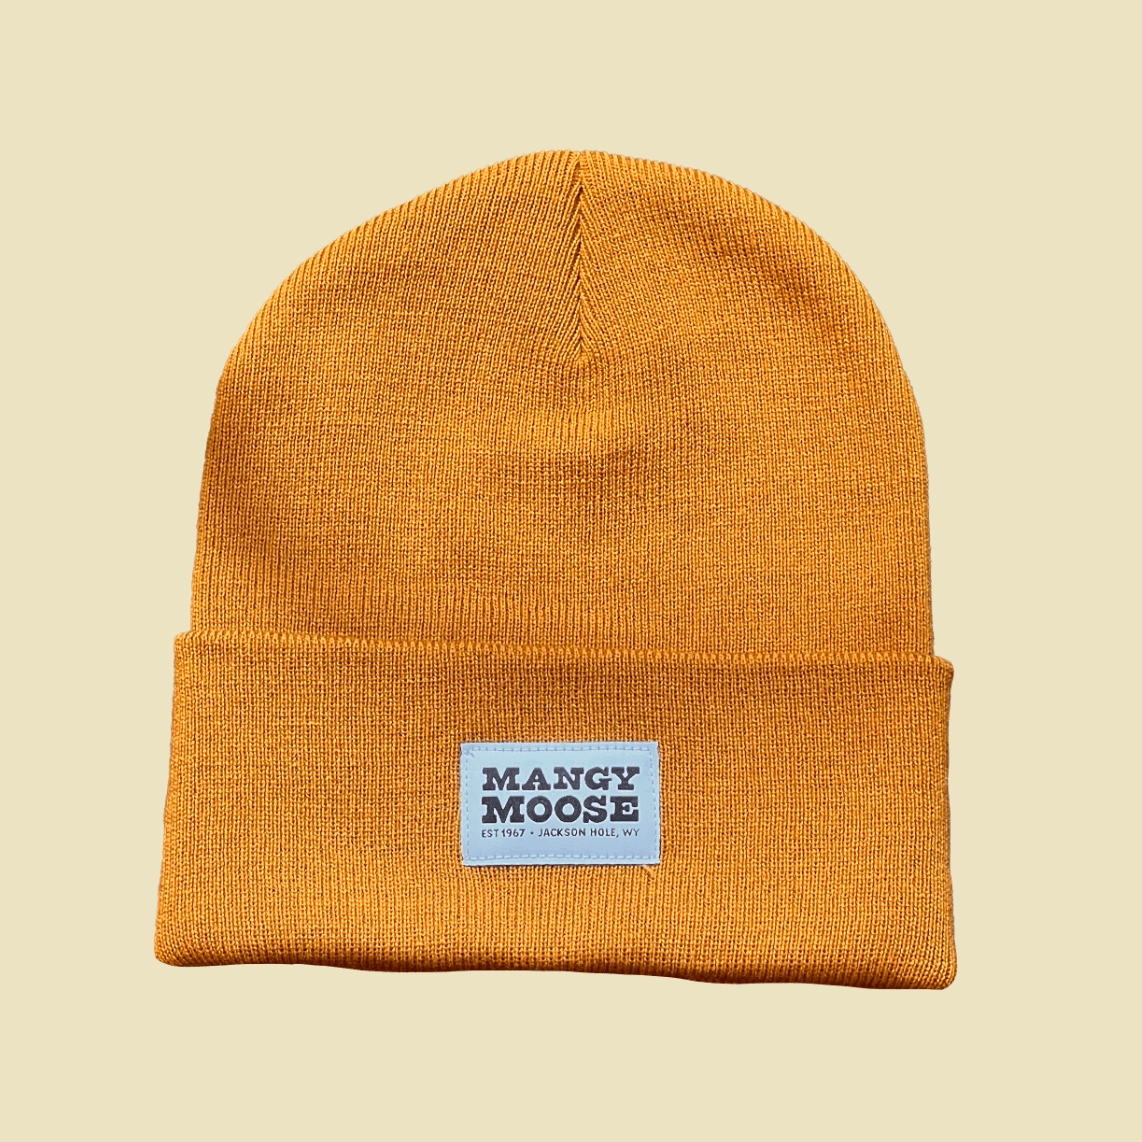 Mangy Moose Beanie - Mangy Moose